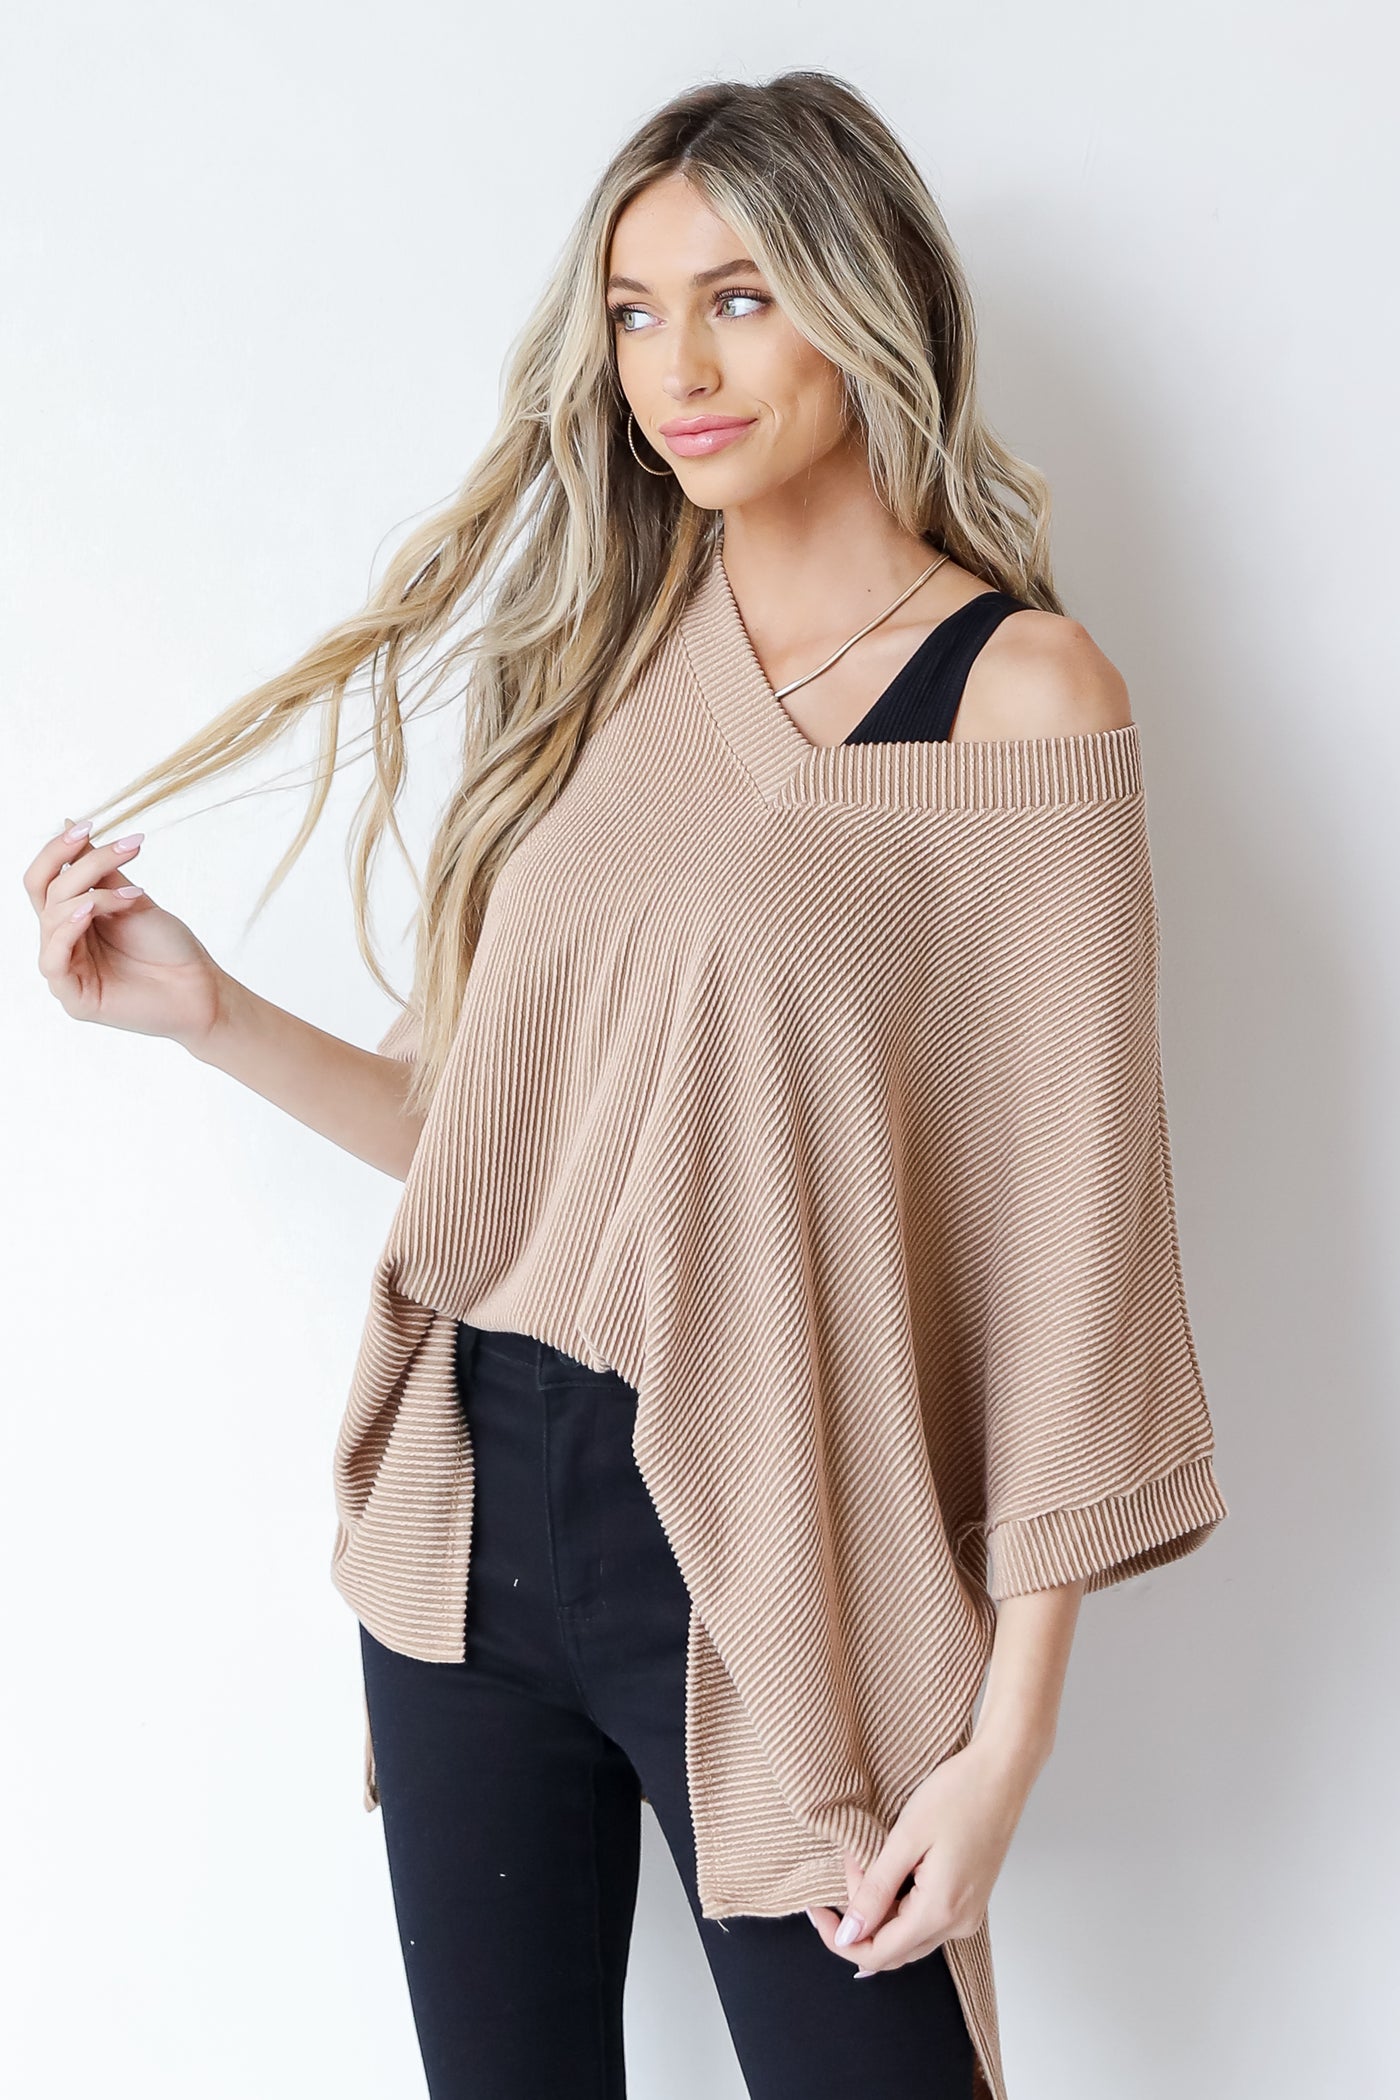 Oversized Corded Top in camel front view